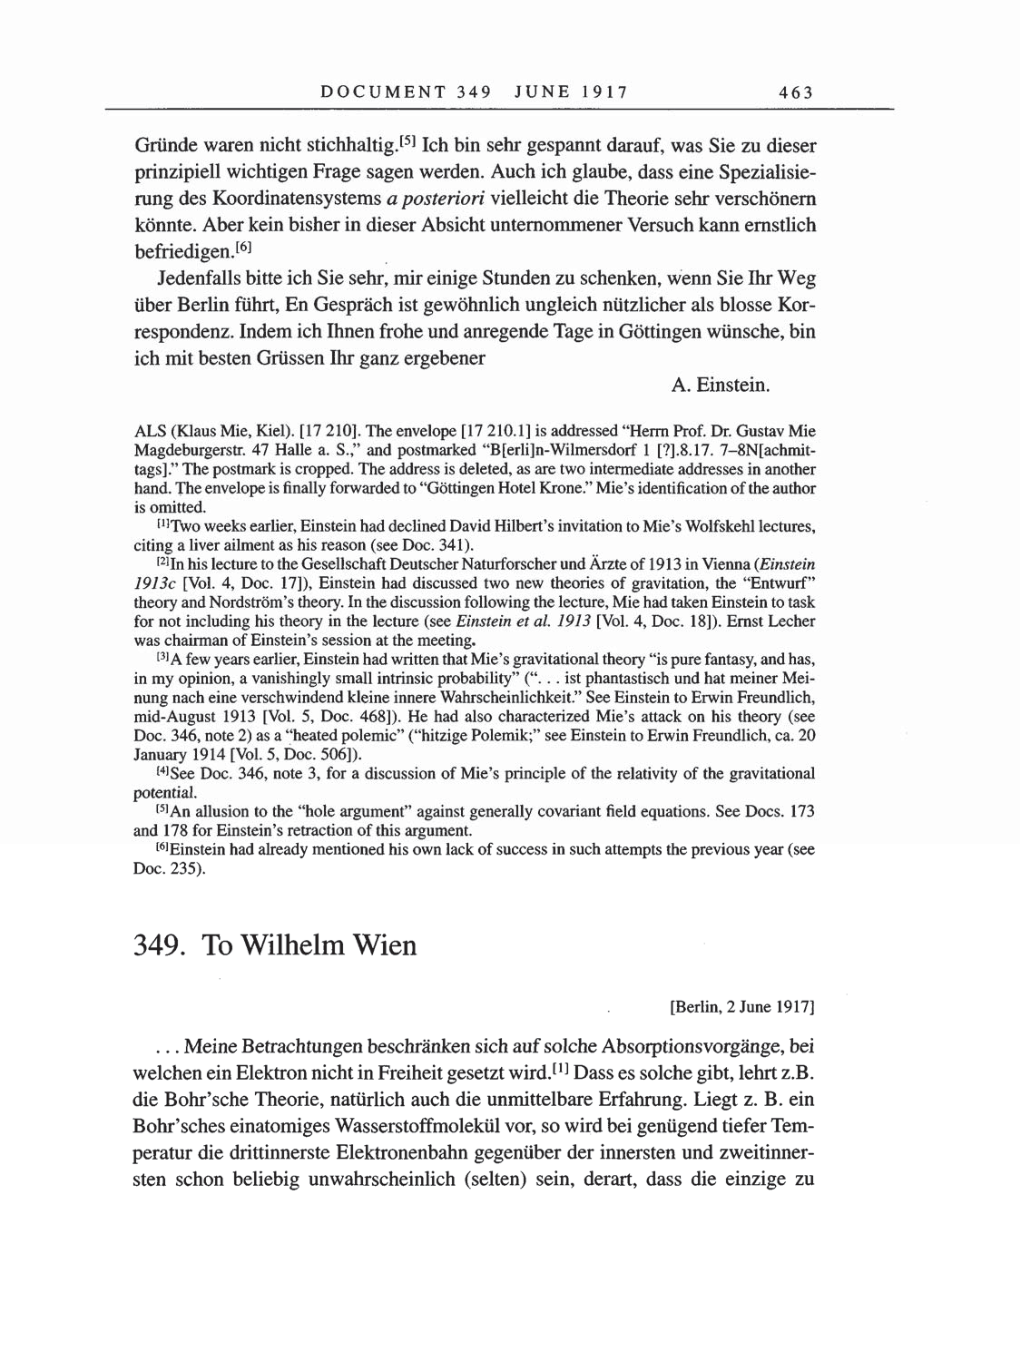 Volume 8, Part A: The Berlin Years: Correspondence 1914-1917 page 463